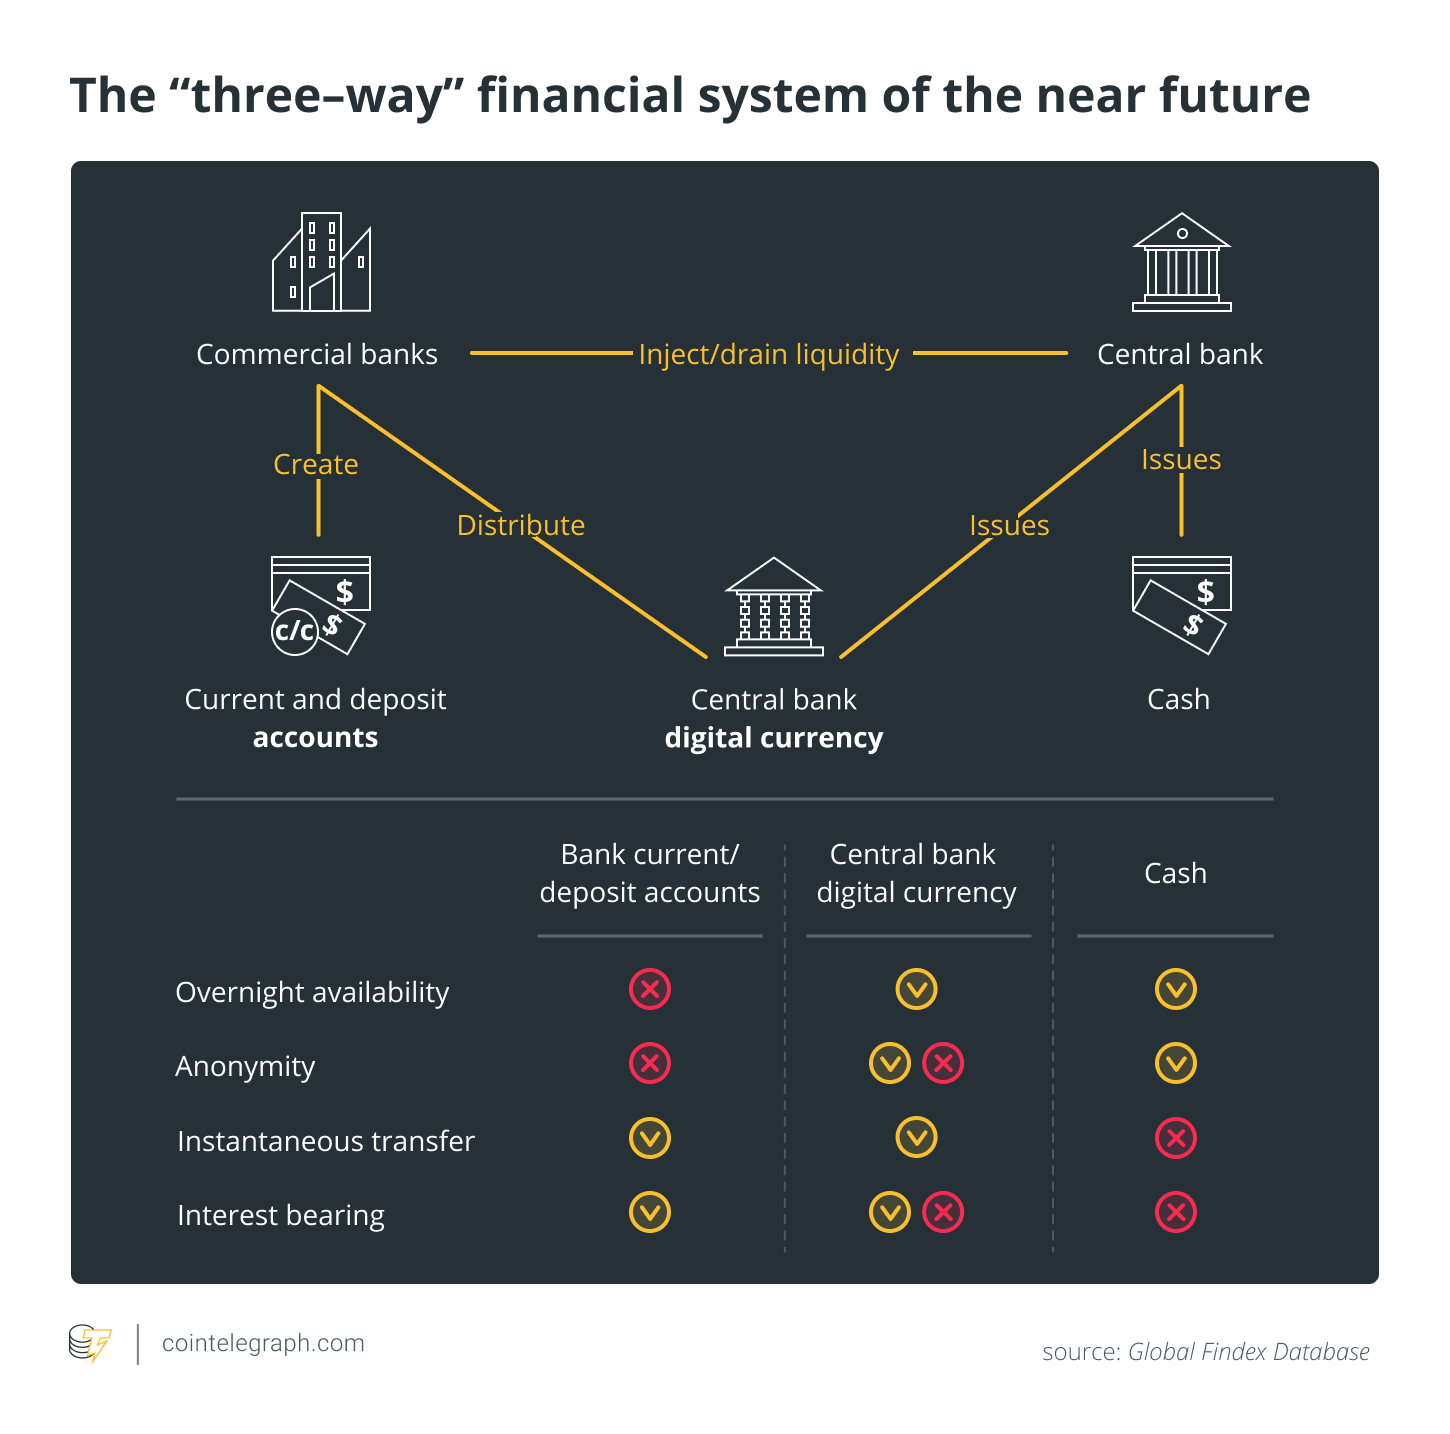 The “three-way” financial system of the near future